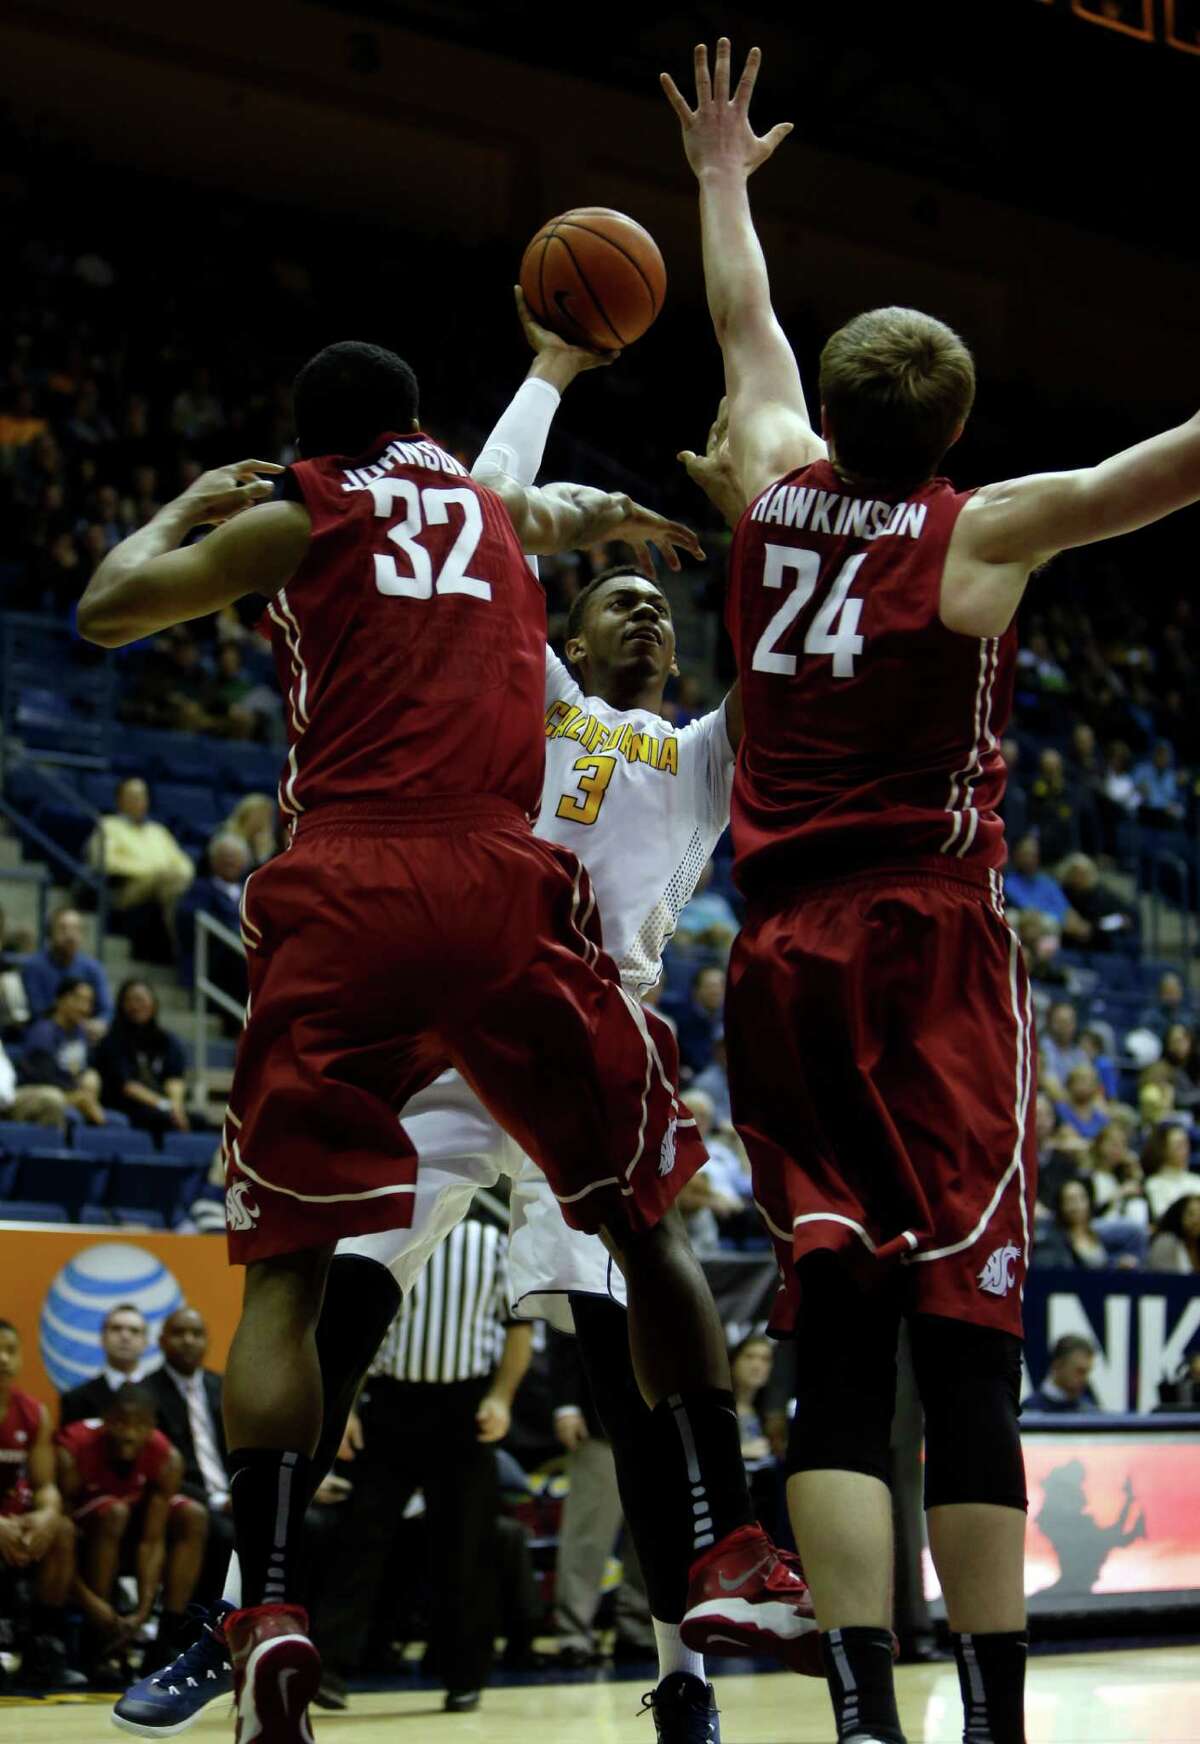 Cal’s Tyrone Wallace, who scored 16 points, looks for shooting room against Que Johnson (32) and Josh Hawkinson.